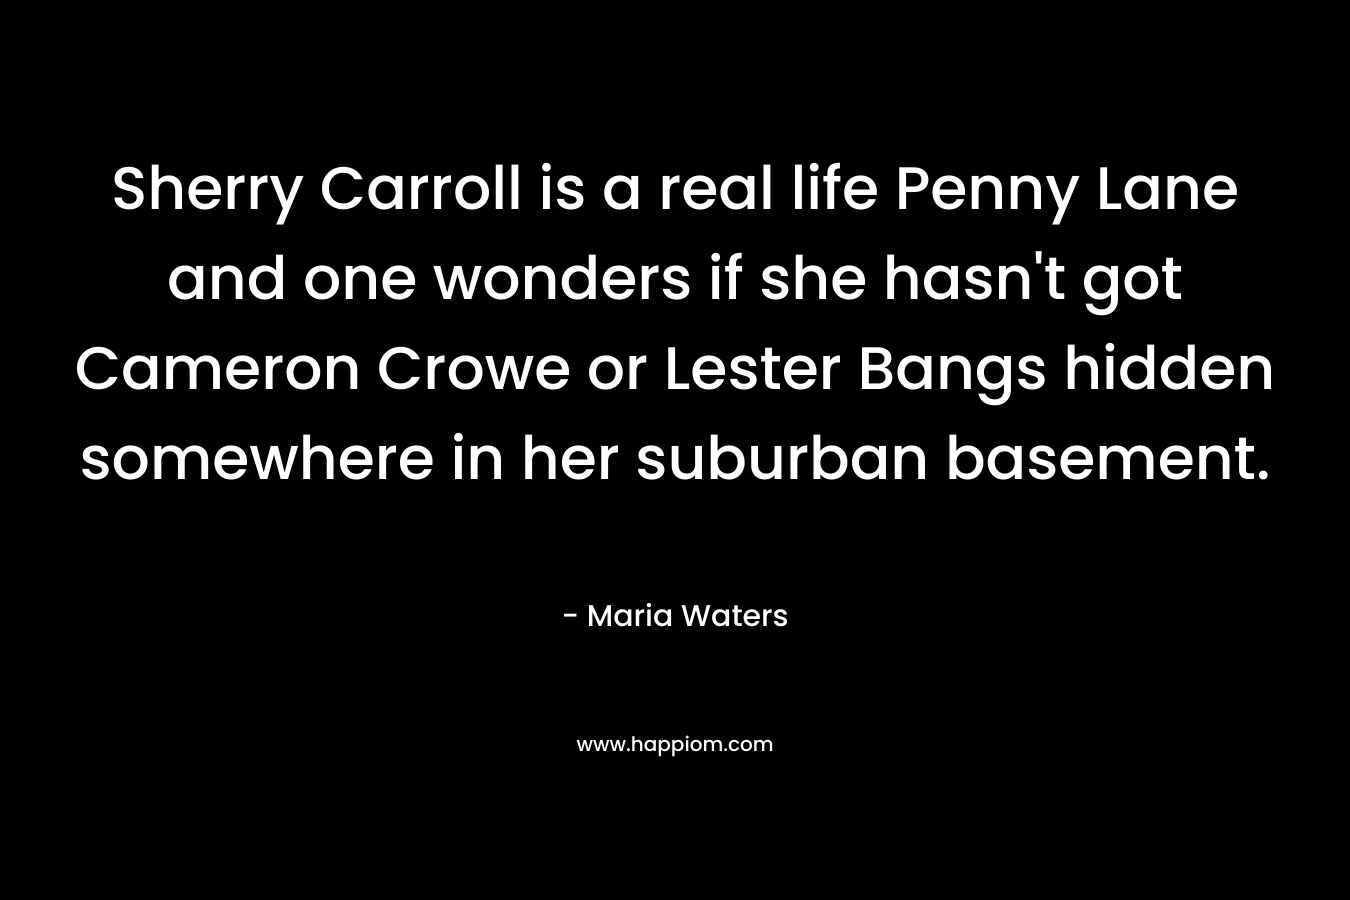 Sherry Carroll is a real life Penny Lane and one wonders if she hasn't got Cameron Crowe or Lester Bangs hidden somewhere in her suburban basement.